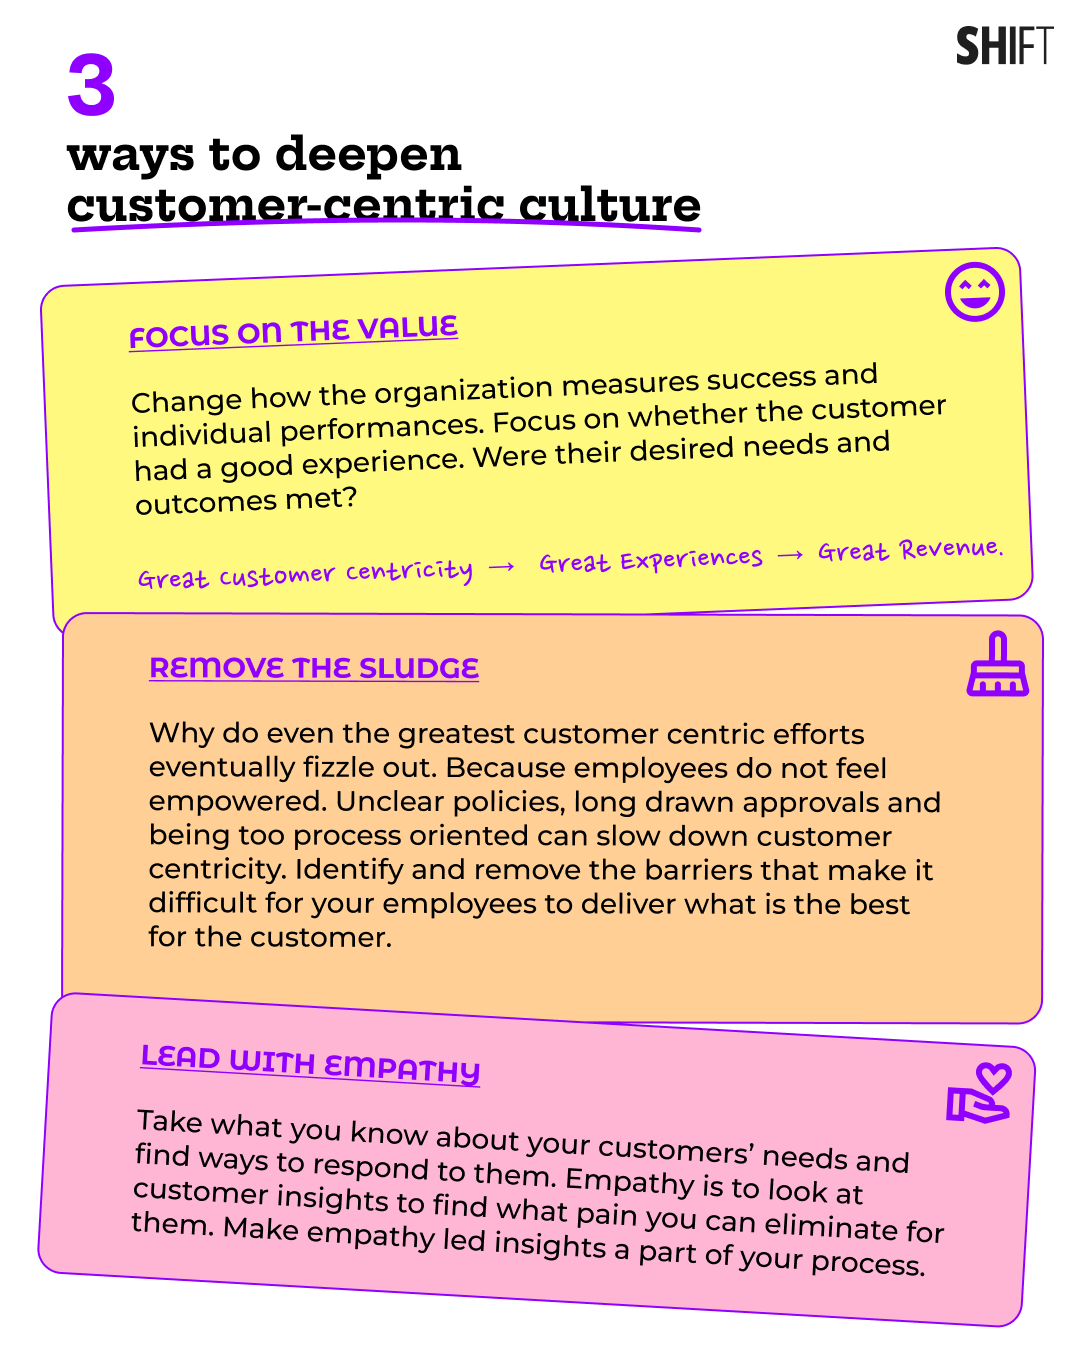 3ways to deepen customer-centric culture